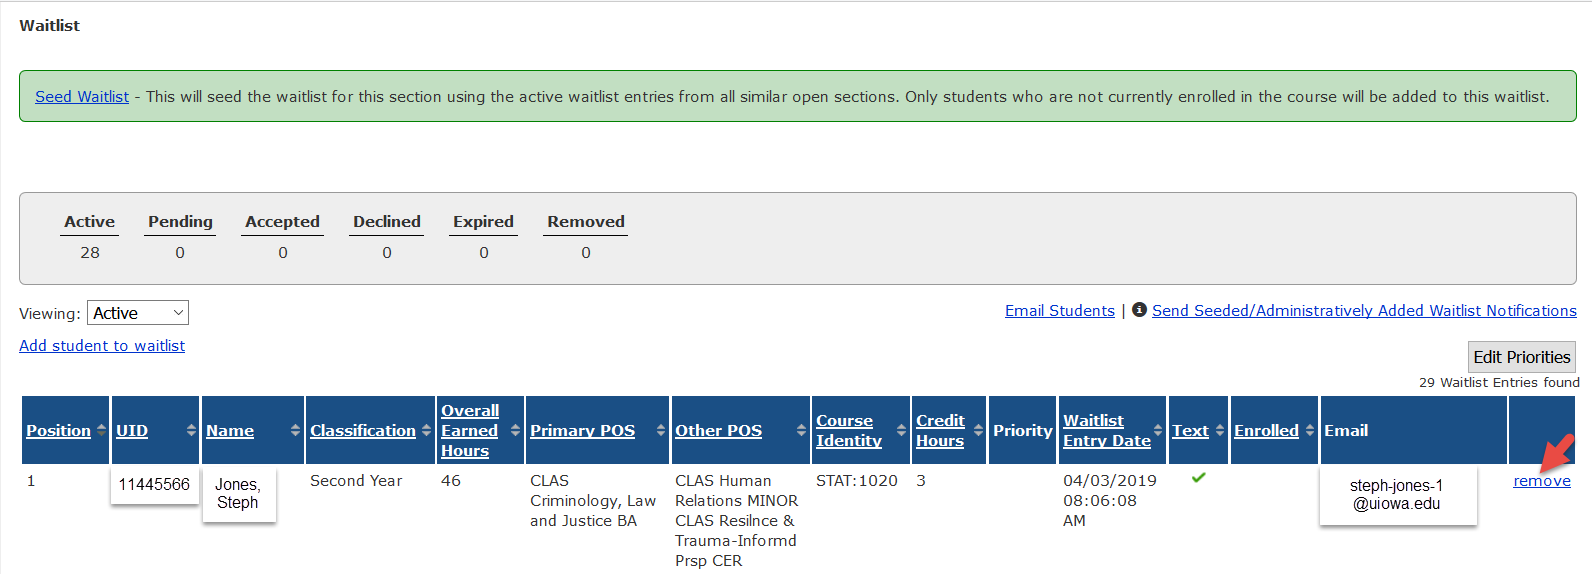 Removing student from waitlist. On waitlist panel, click “Remove”.